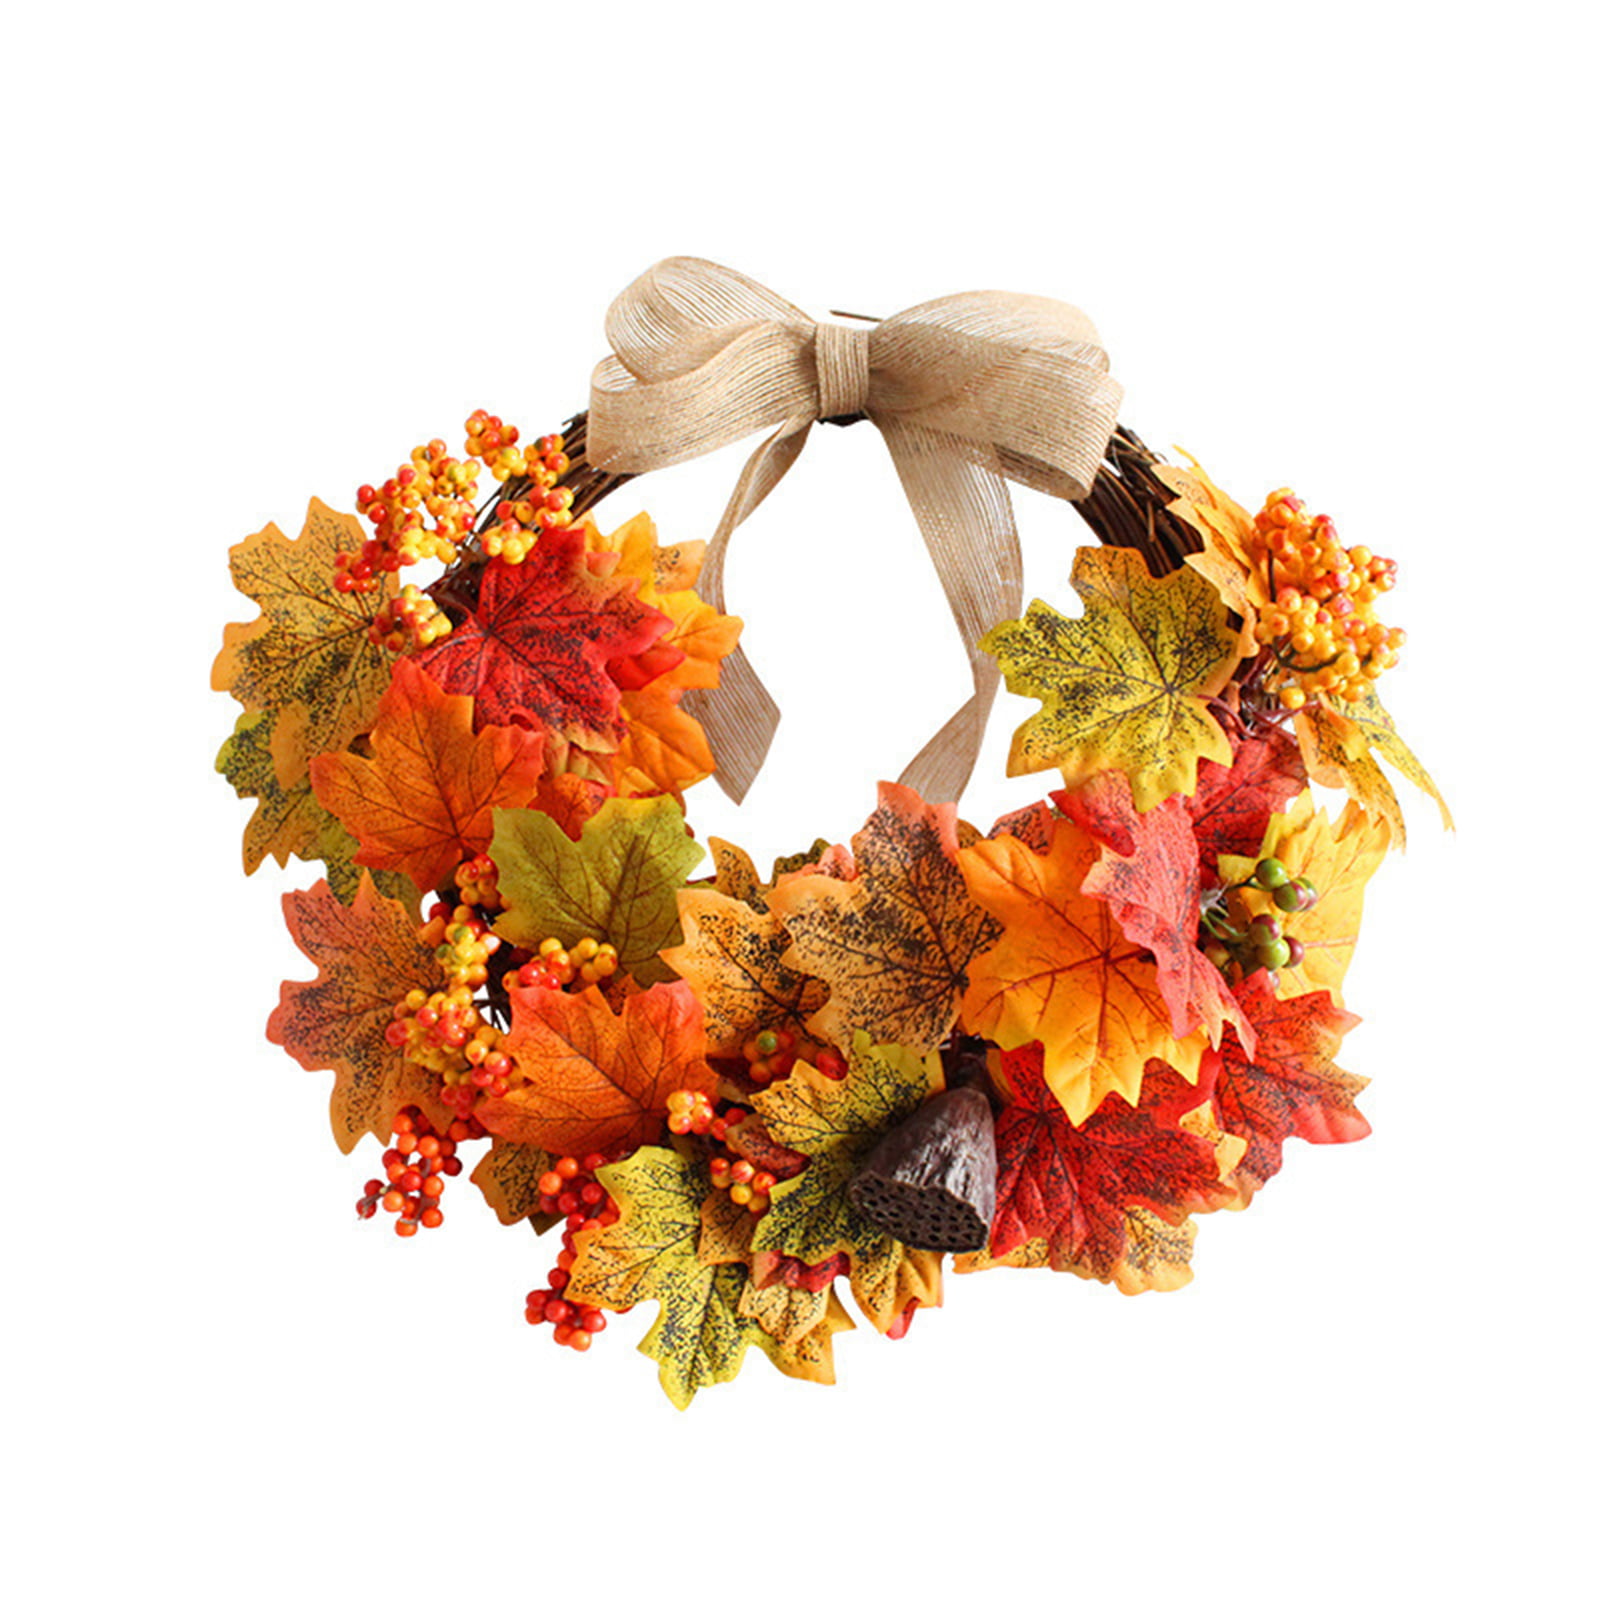 18 Artificial Autumn Wreath Golden Eucalputs Leaves with Small Pumpkin Modern Farmhouse Wreath Garland for Hanging Window Wall Decorations YNYLCHMX Fall Wreaths for Front Door